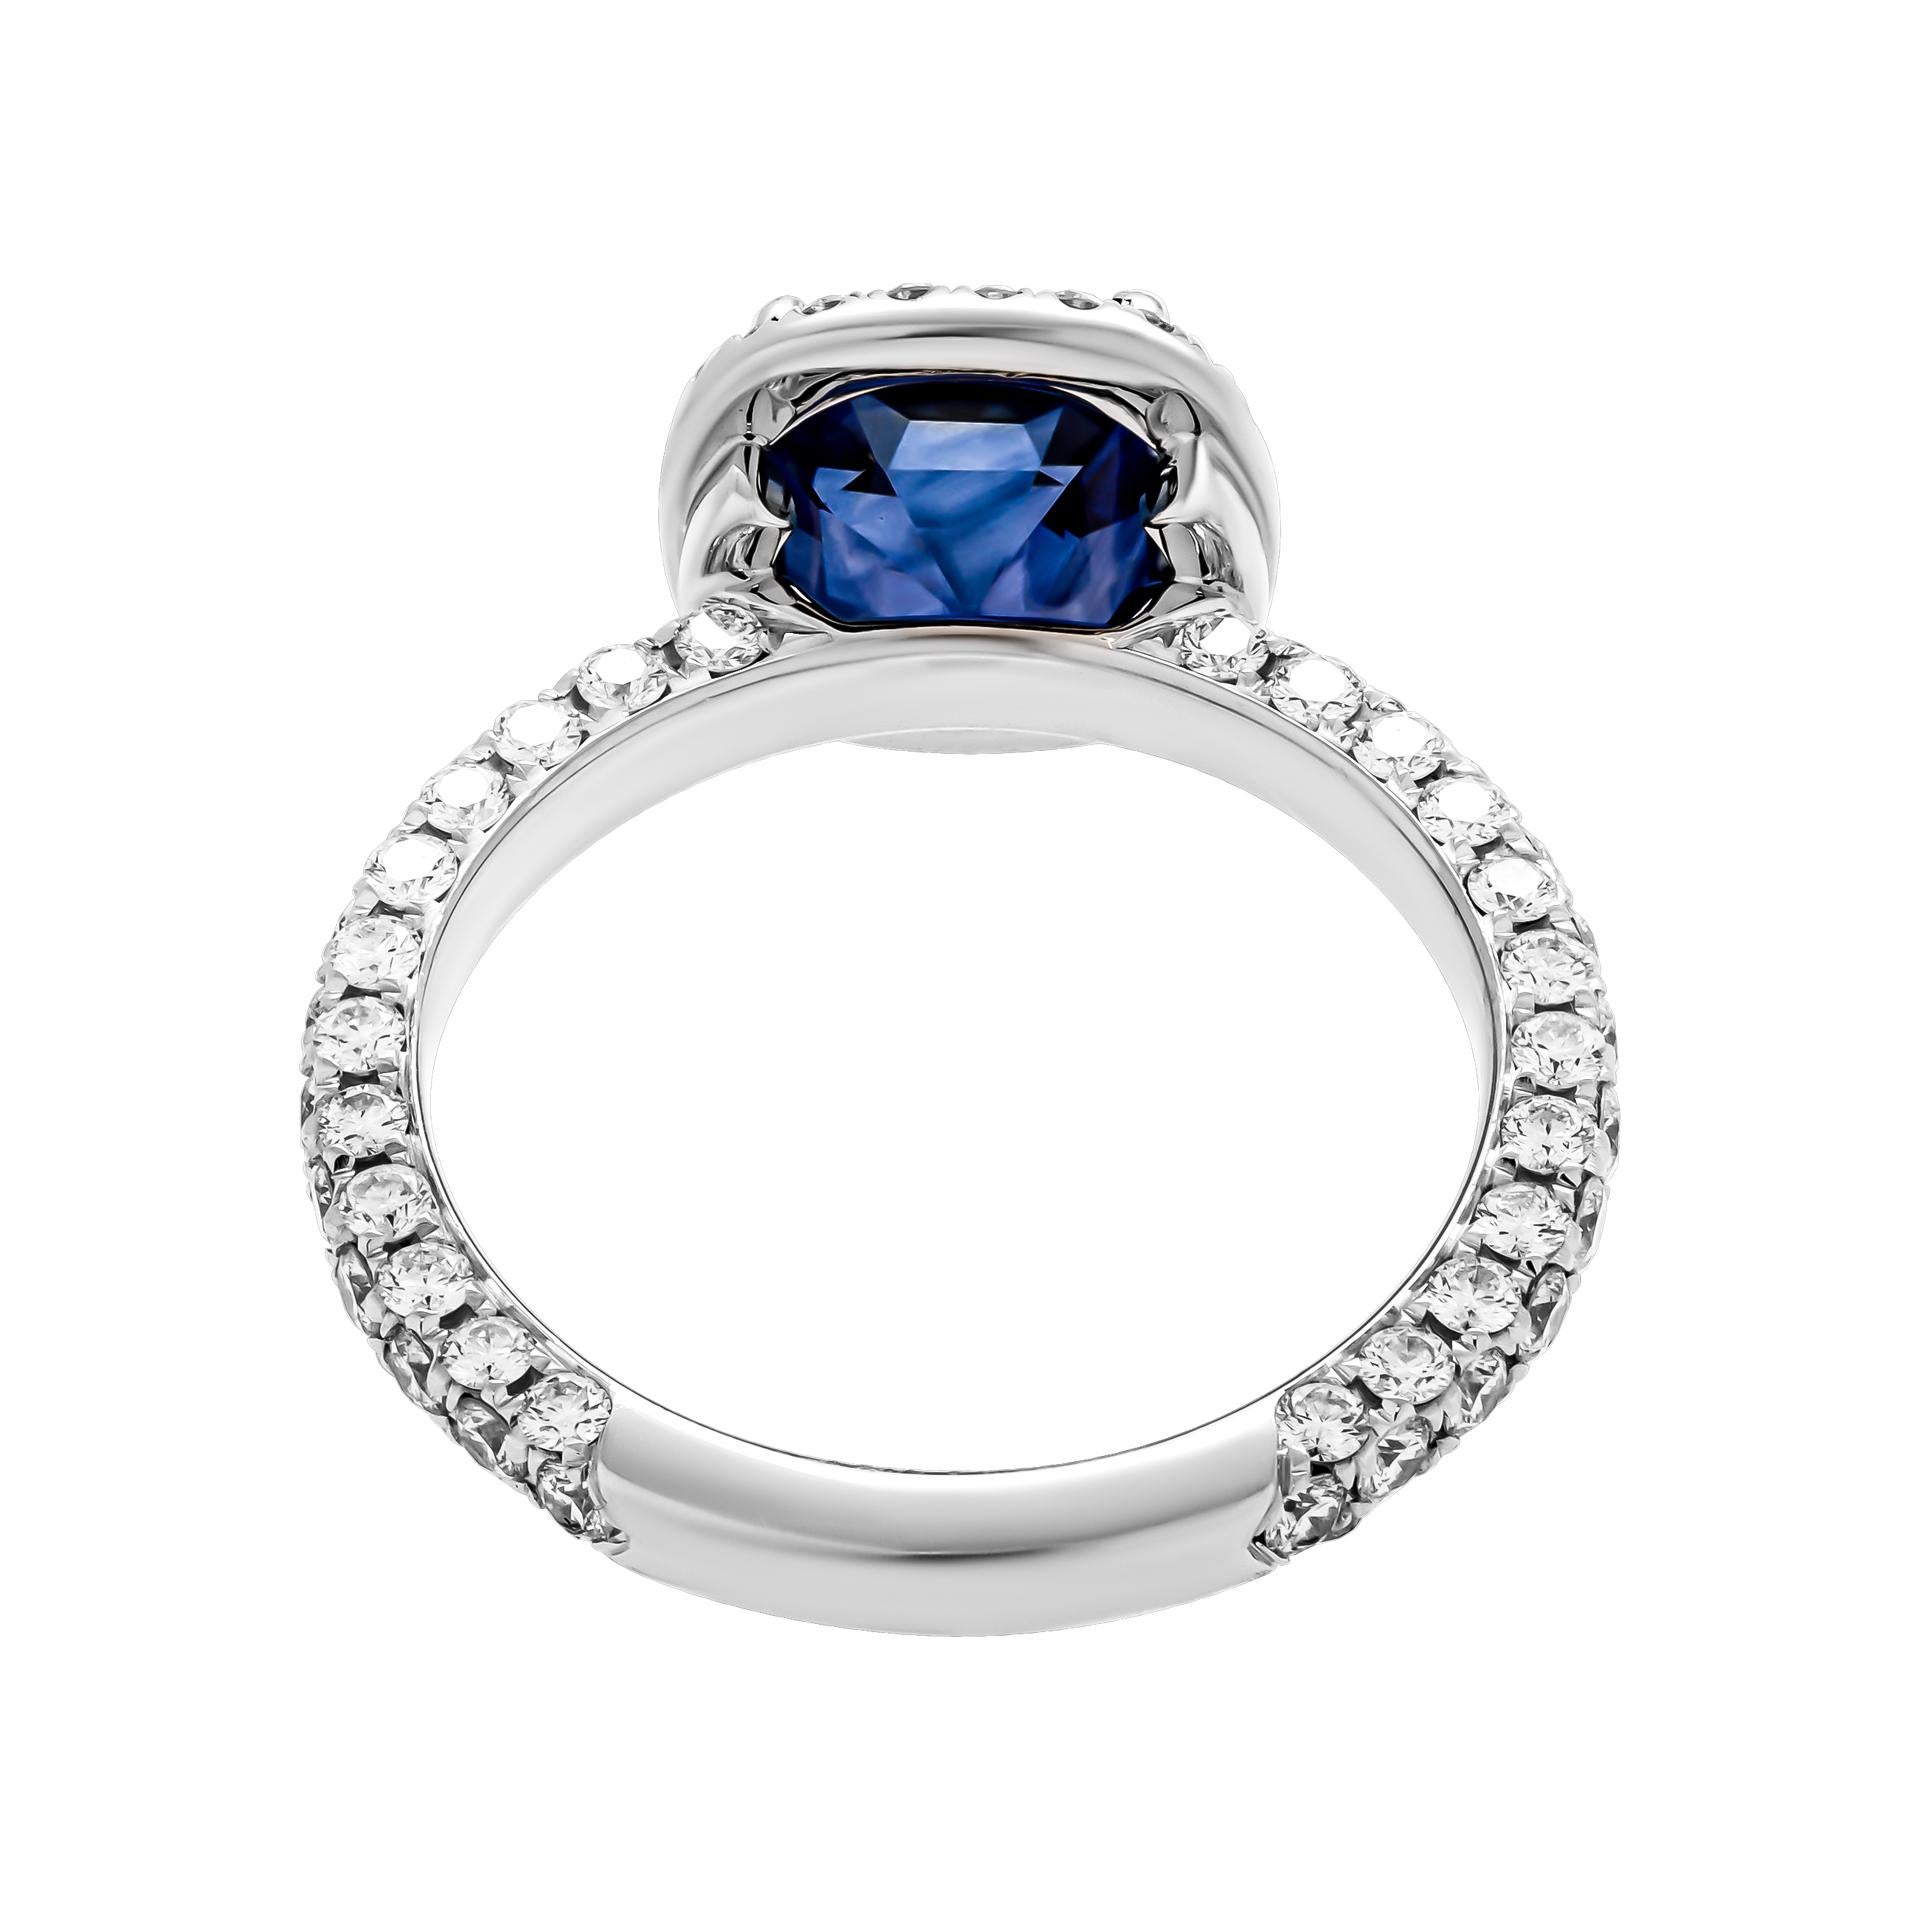 Ring in Platinum 
With 3 row diamond shank & classic halo with 3.08ct Cushion Sapphire
 Pave Total Carat Weight: 0.81ct 
Size: 6